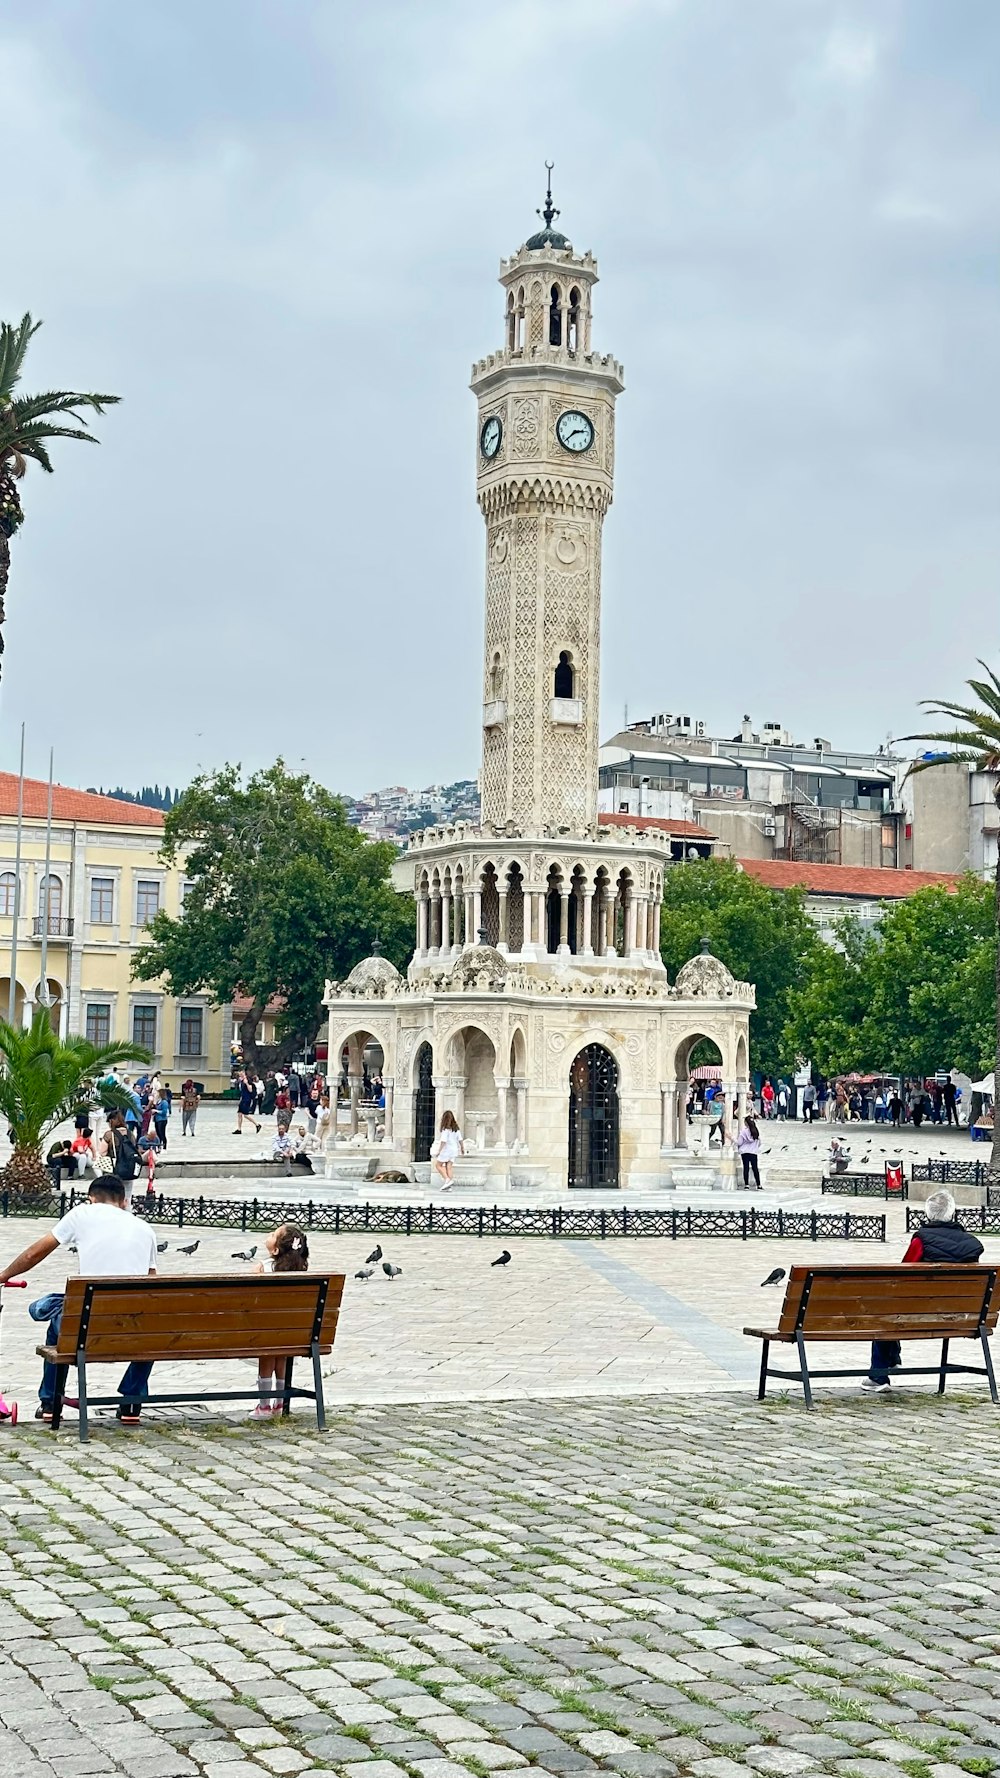 two people sitting on benches in front of a clock tower